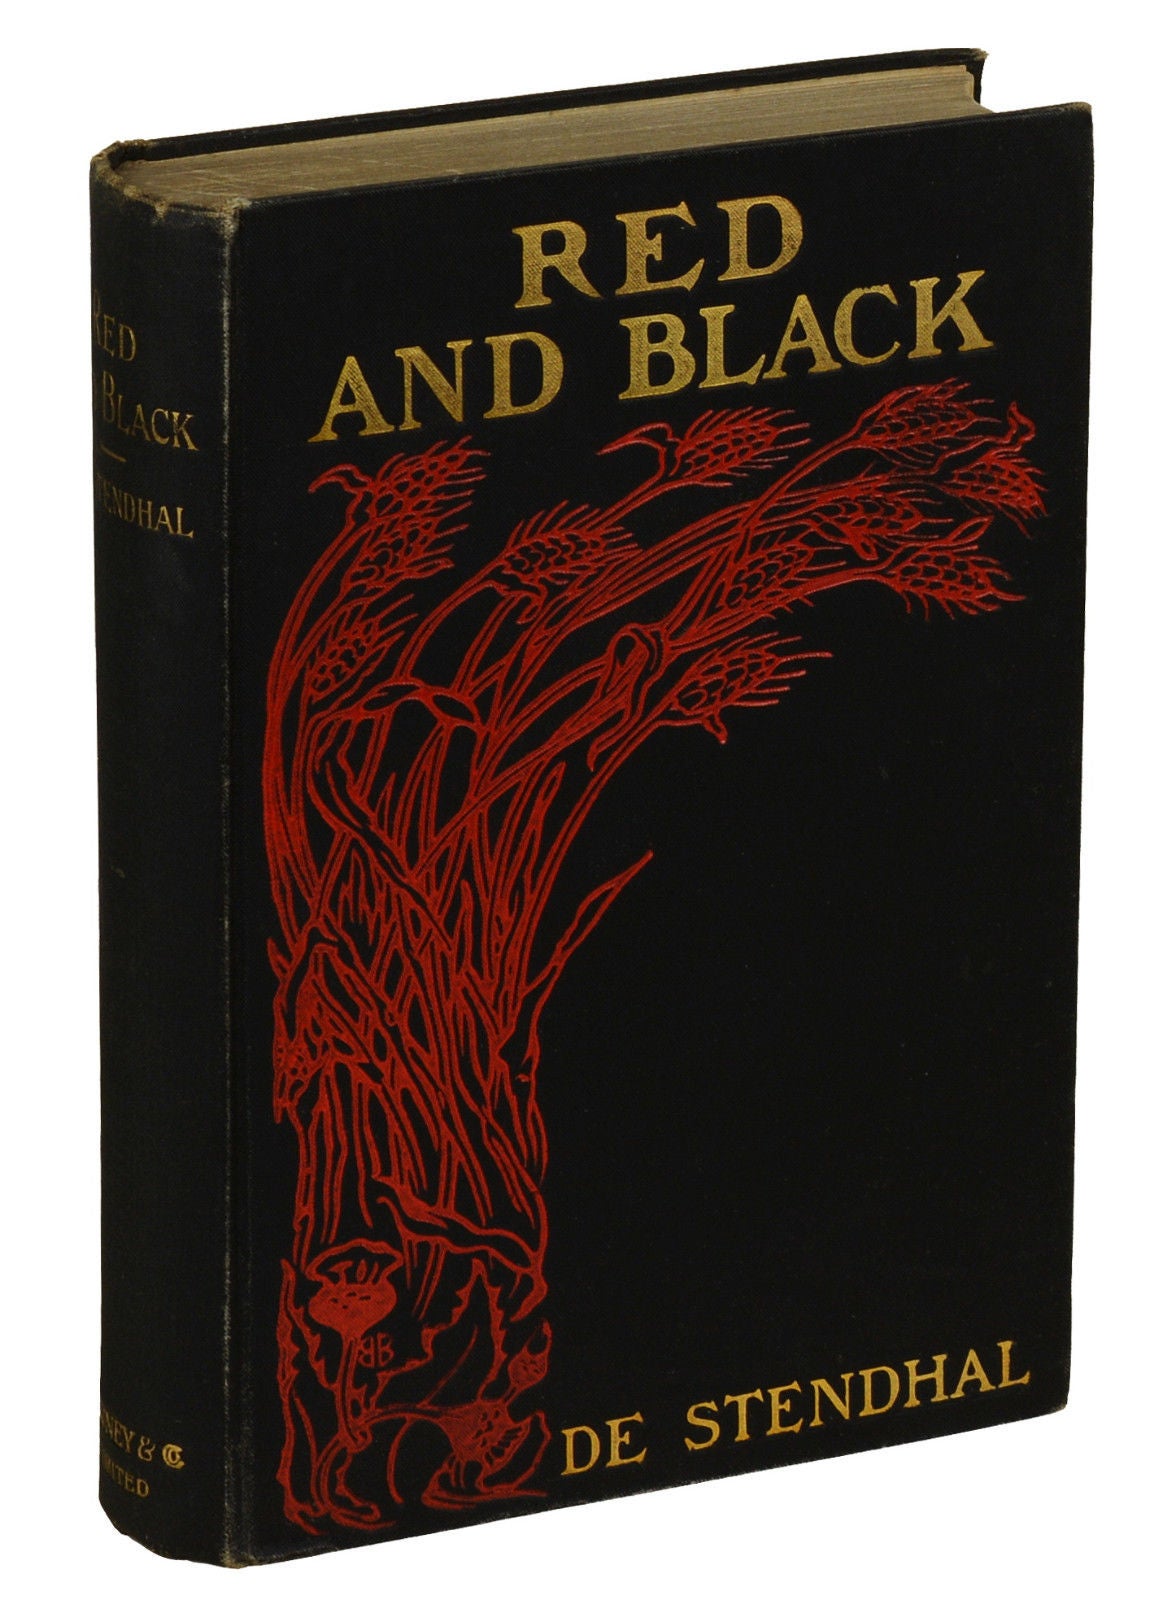 Red and Black: A of France | de Stendhal, Marie-Henri Beyle | First Edition